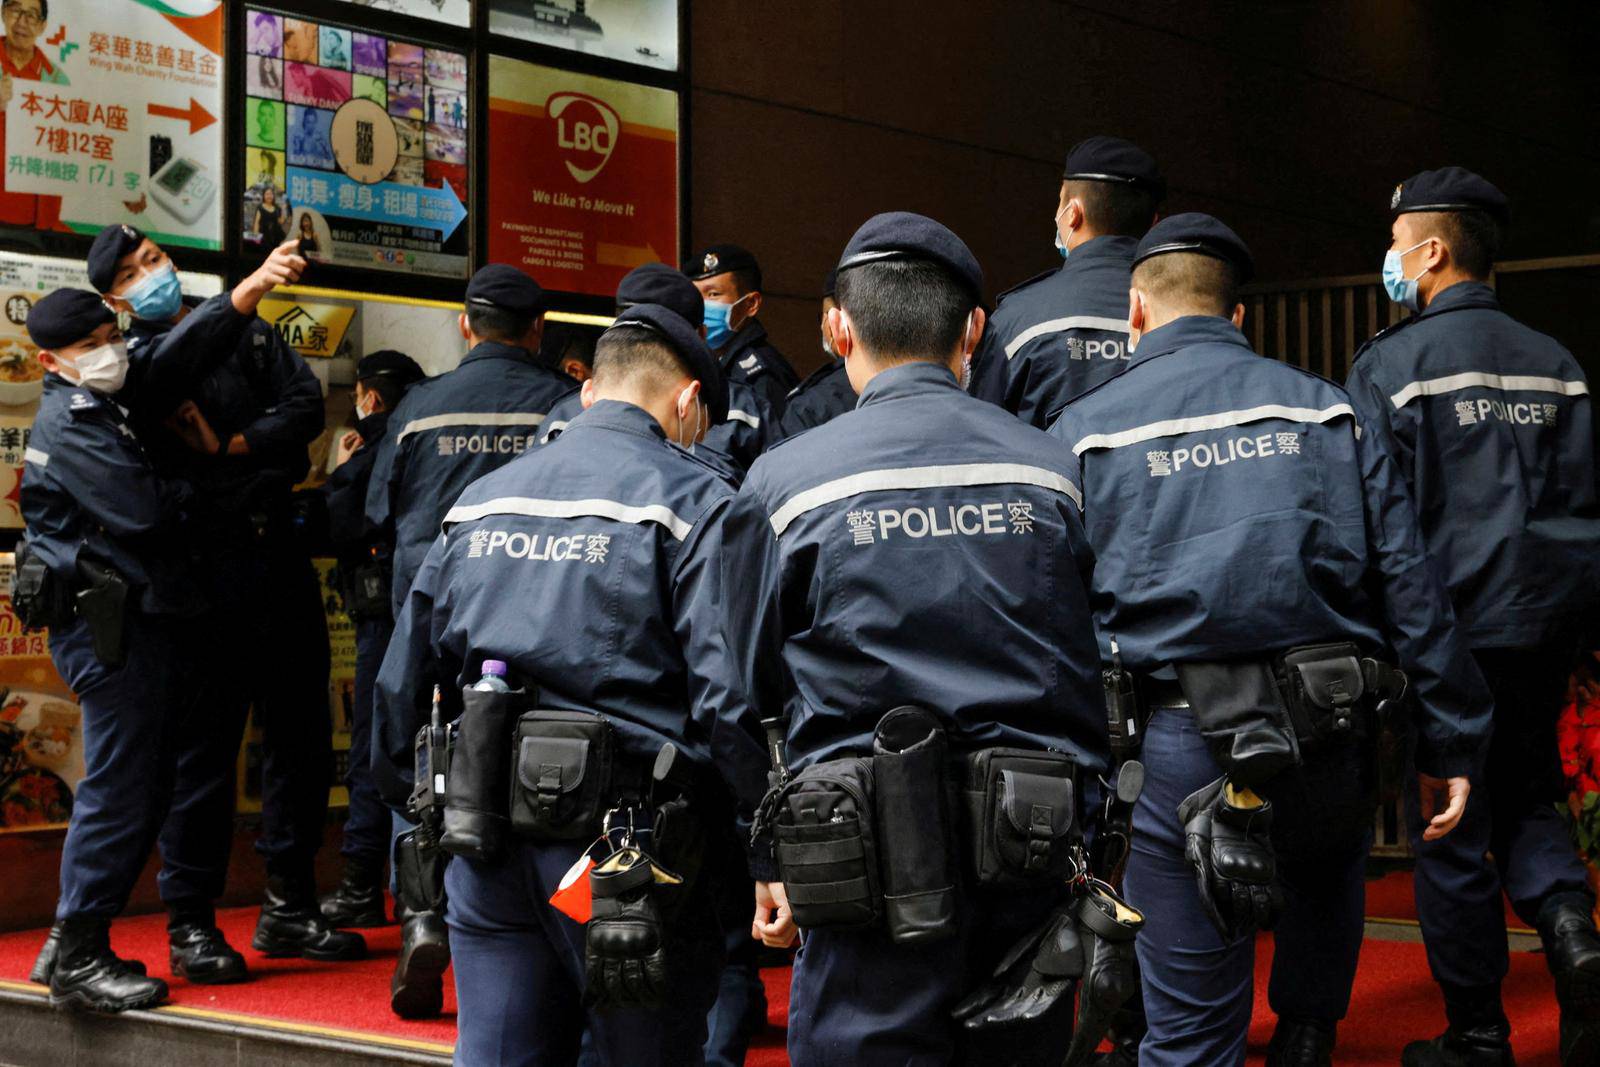 FILE PHOTO: Police are seen outside the Stand News office building, after six people were arrested "for conspiracy to publish seditious publication" according to Hong Kong's Police National Security Department, in Hong Kong